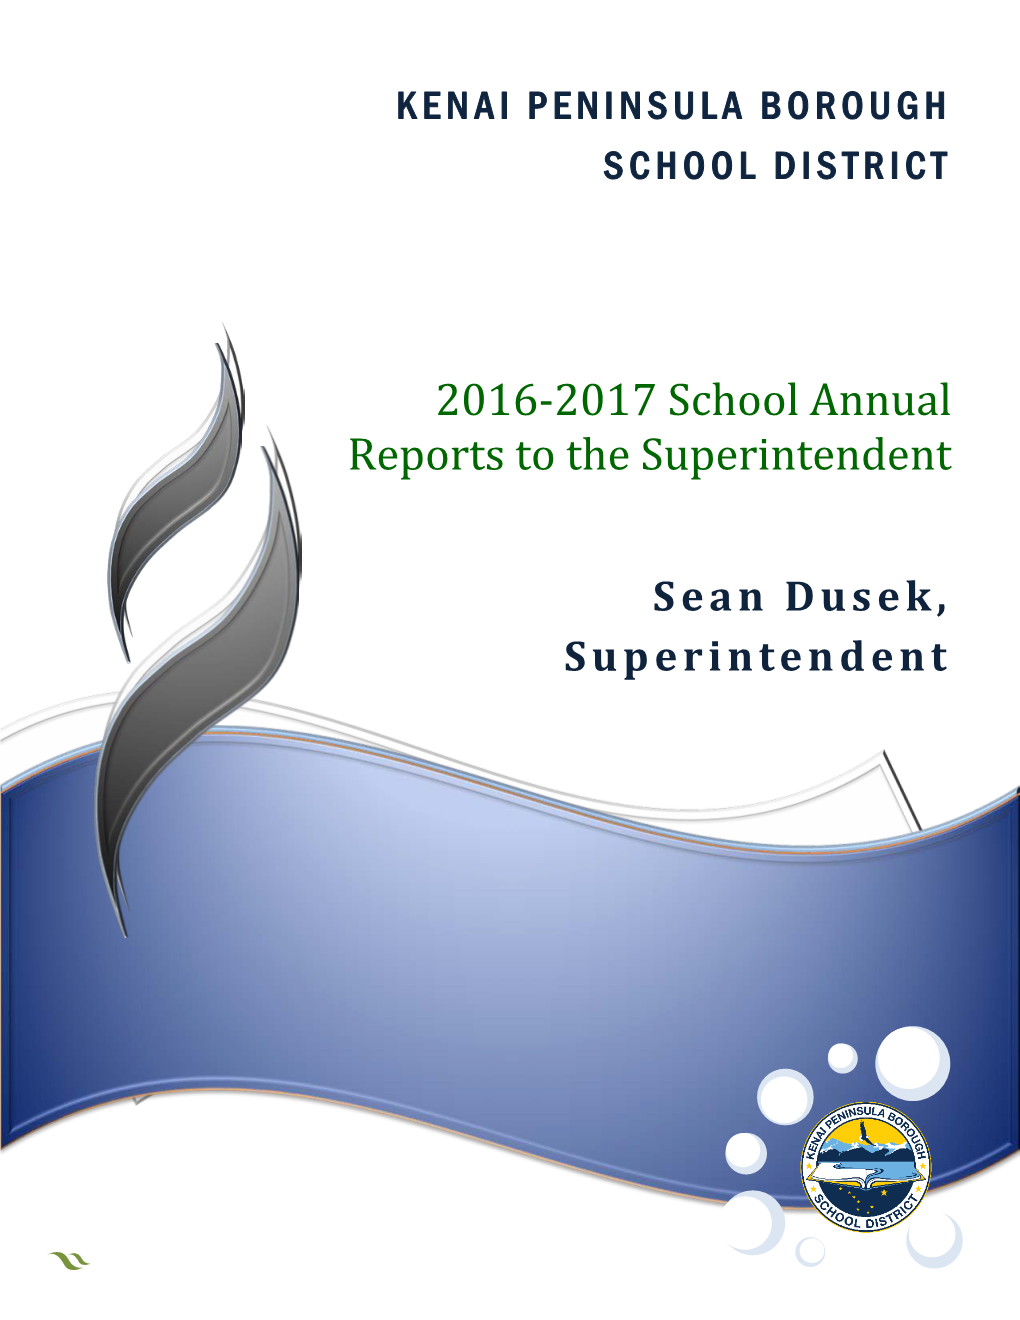 2016-2017 School Annual Reports to the Superintendent